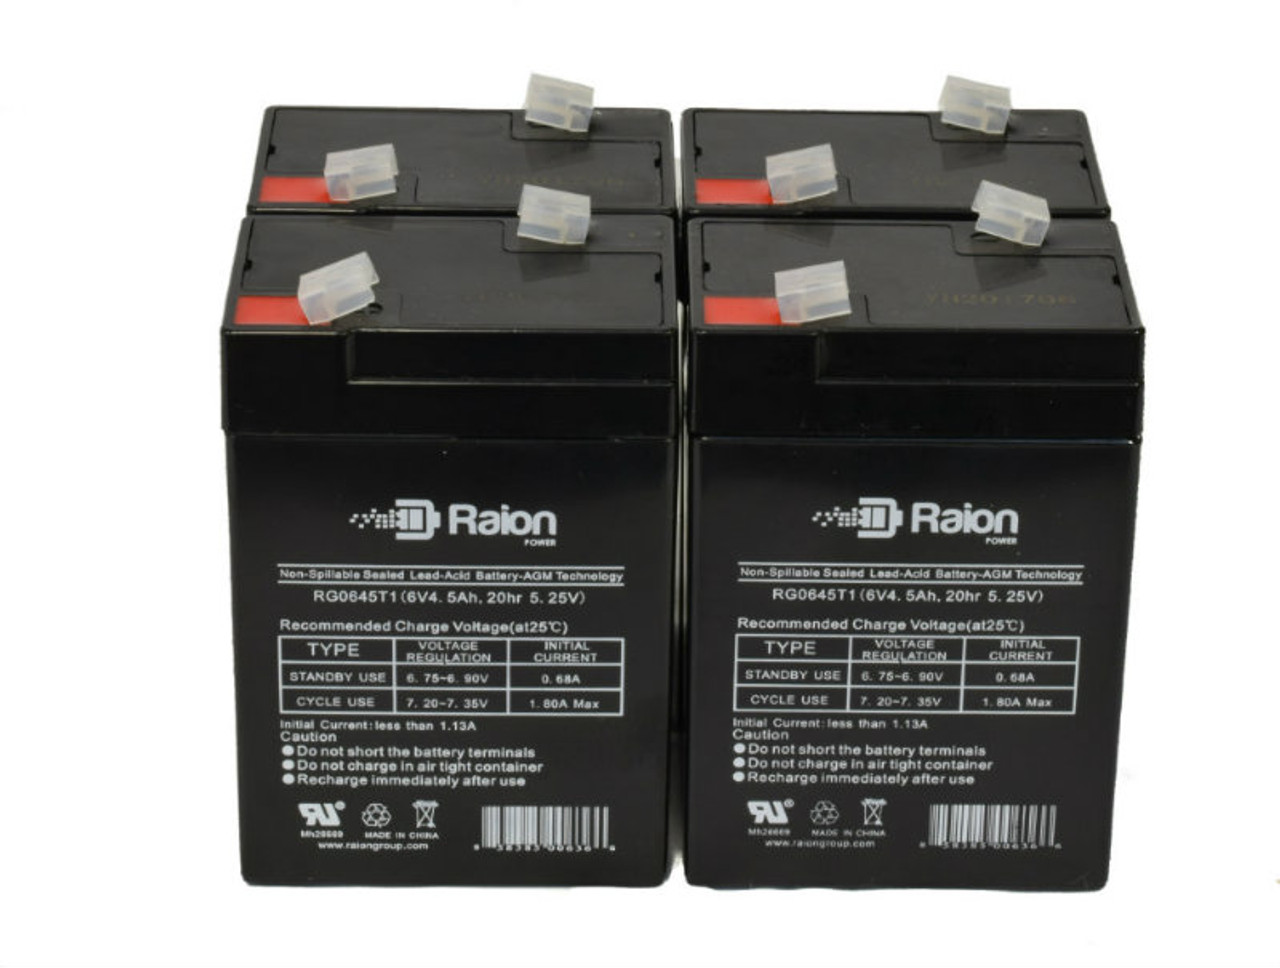 Raion Power 6V 4.5Ah Replacement Emergency Light Battery for Sure-Lites 2602 - 4 Pack